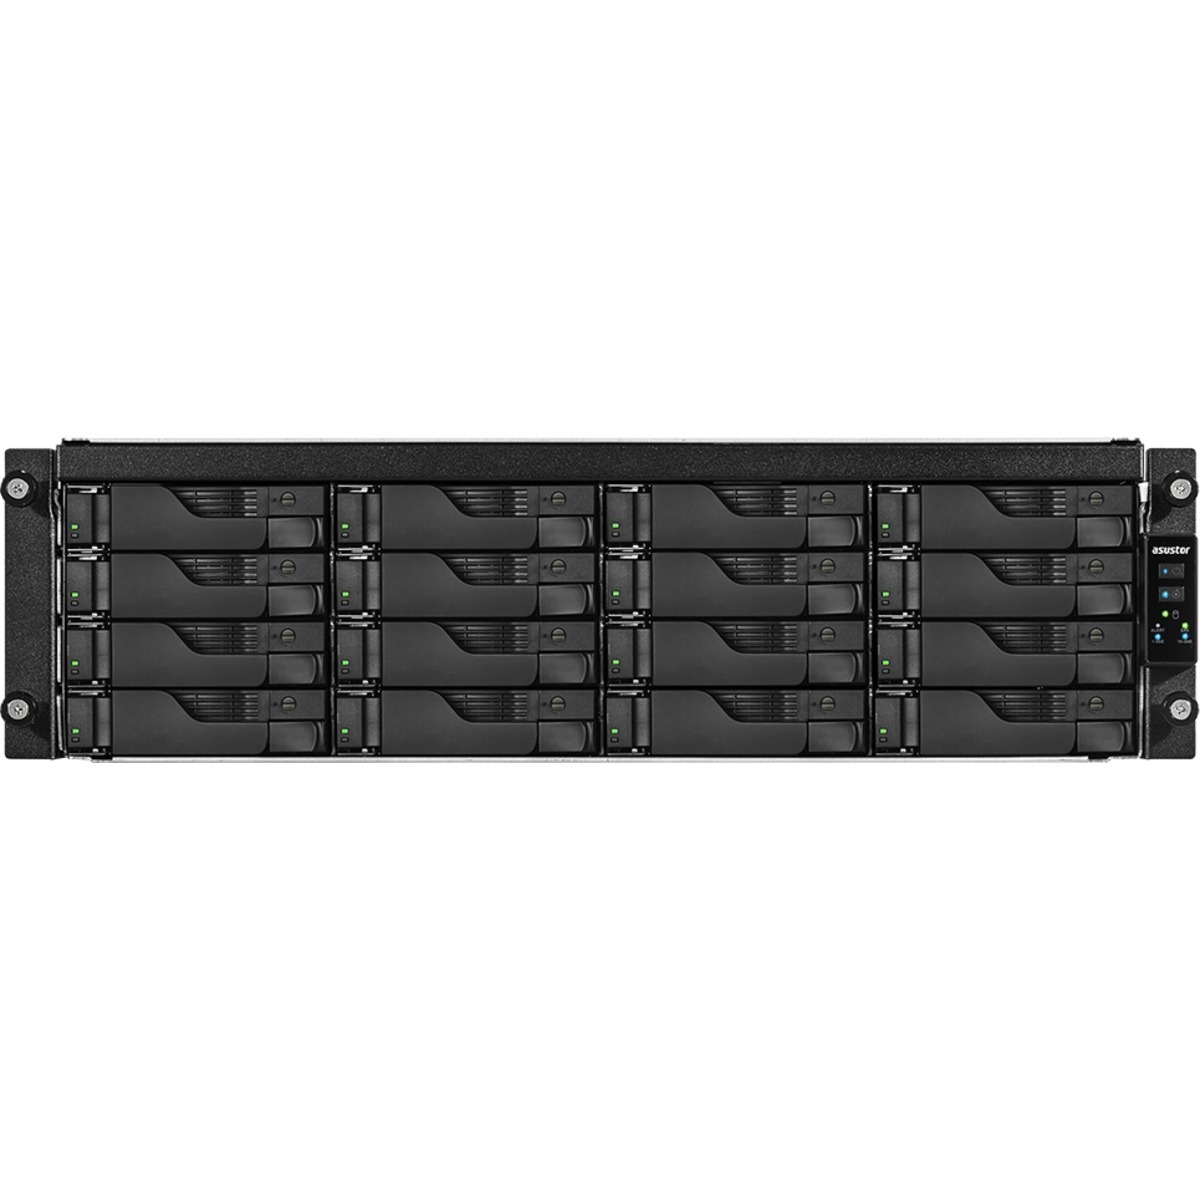 buy $10038 ASUSTOR AS7116RDX Lockerstor 16R Pro 128tb RackMount NAS - Network Attached Storage Device 16x8000gb Toshiba Enterprise Capacity MG08ADA800E 3.5 7200rpm SATA 6Gb/s HDD ENTERPRISE Class Drives Installed - Burn-In Tested - ON SALE - nas headquarters buy network attached storage server device das new raid-5 free shipping usa christmas new year holiday sale AS7116RDX Lockerstor 16R Pro